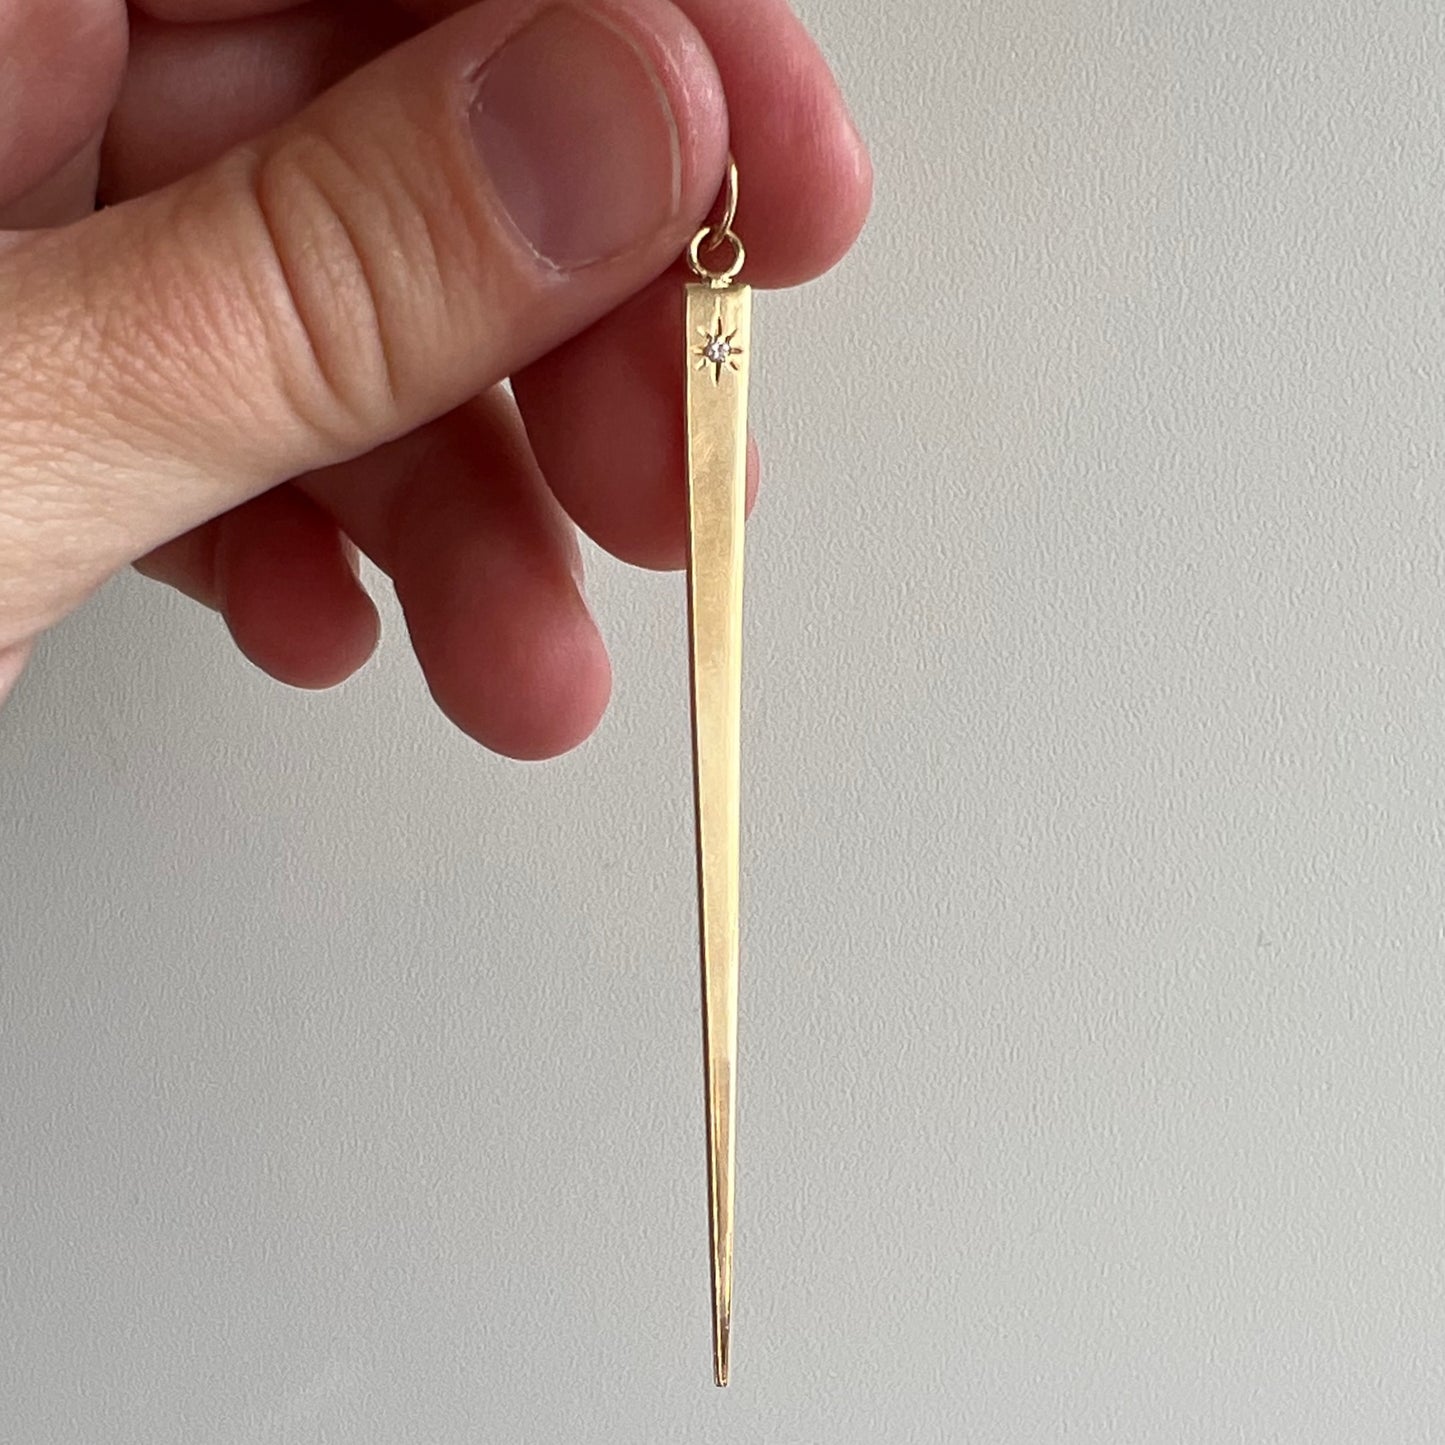 reimagined V I N T A G E // dream pick / 14k yellow gold and diamond toothpick / a pendant